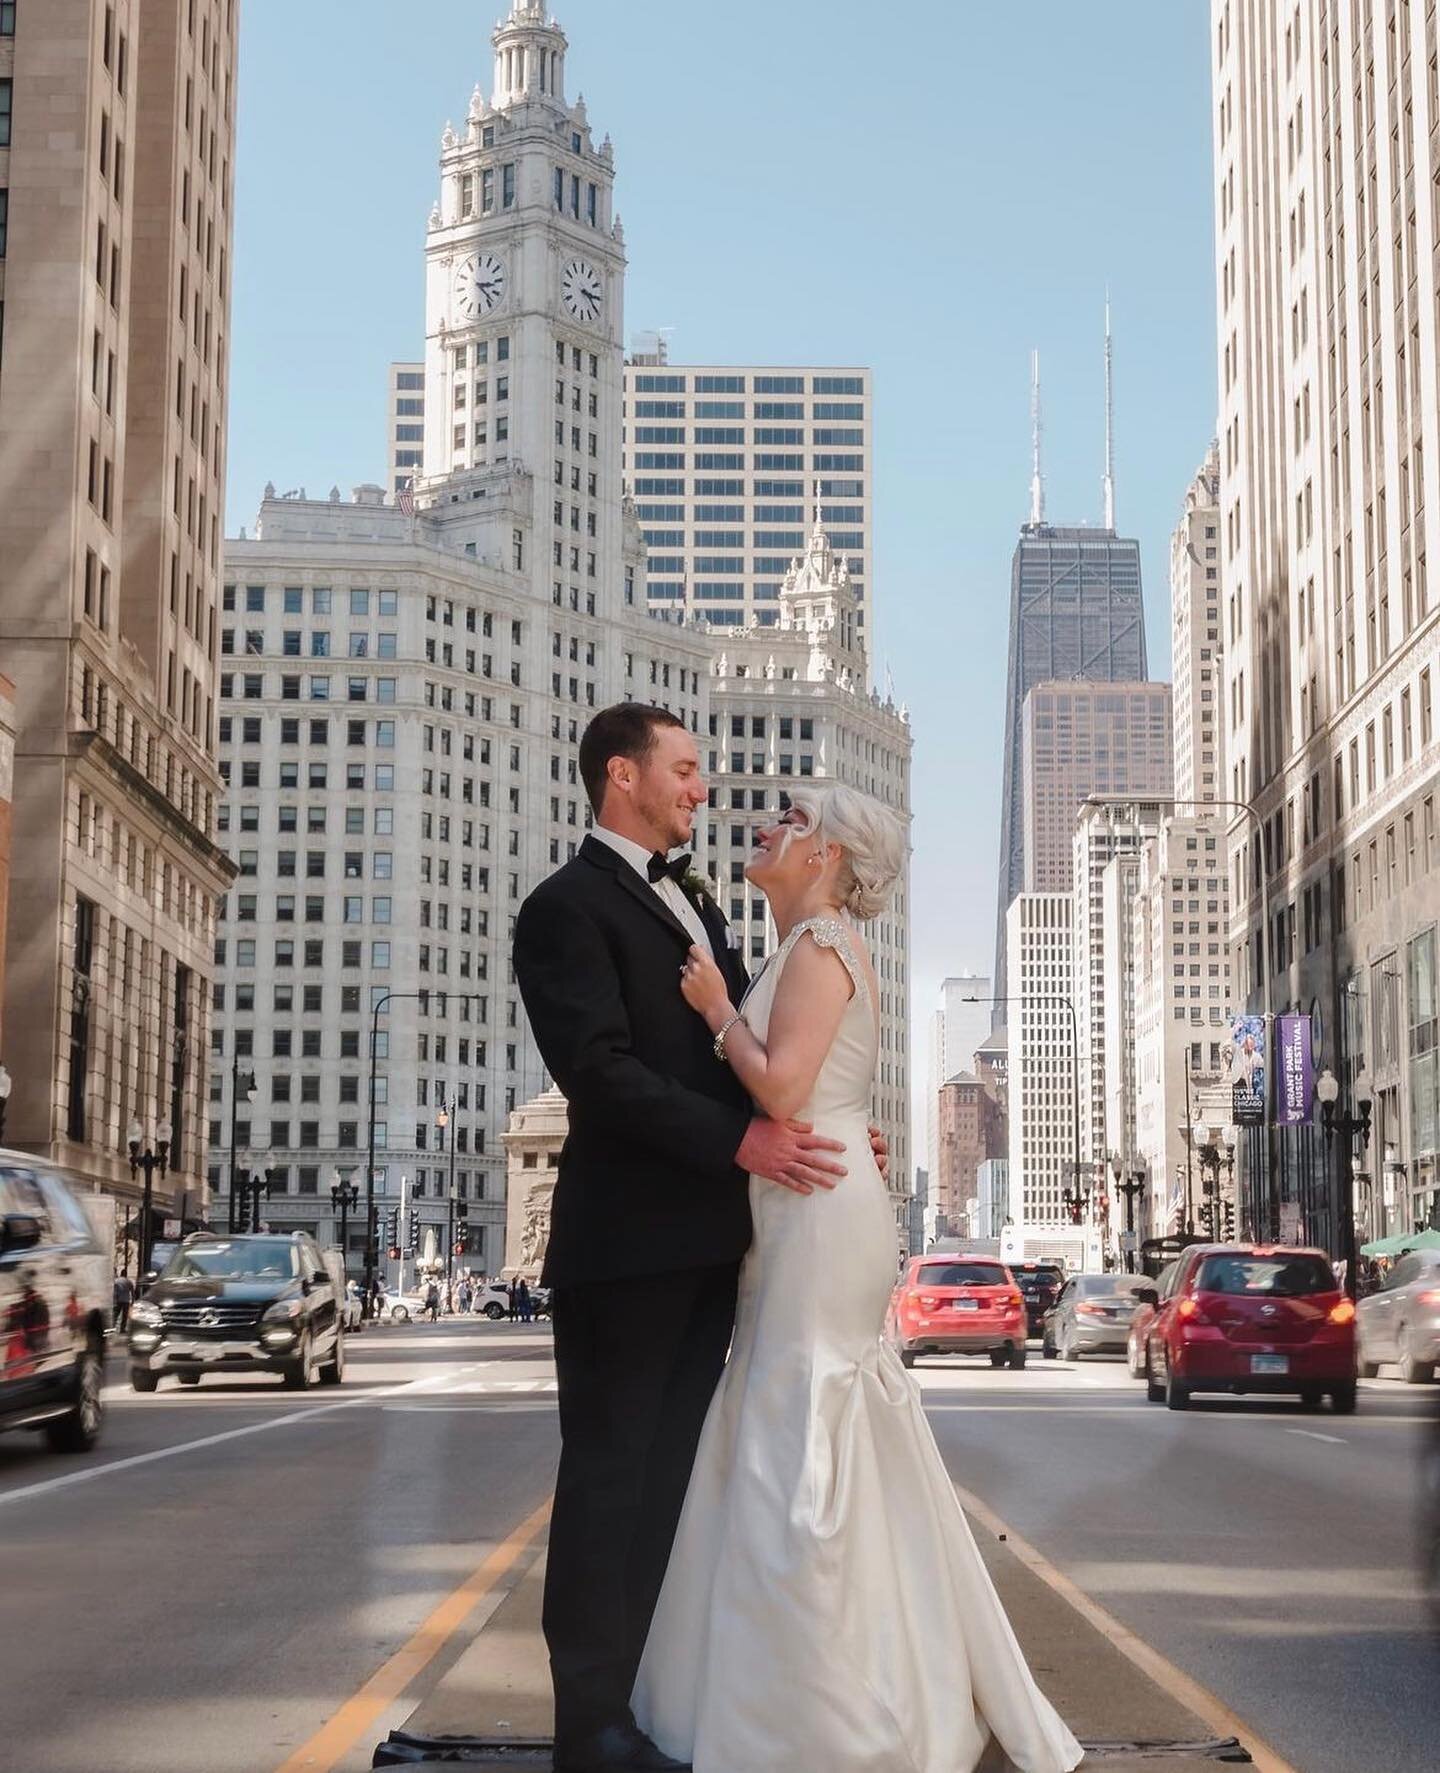 Nothing like a Gorgeous Bride on her Wedding Day in Chicago❤️❤️❤️ #victoriasdoukoscouture #vollesbridalboutique #chicago #bride #weddingday #timeless #chic #weddingdress #silk #gown #glamdoll #city #vibes #madeintheusa #madewithlove #realbride #shesa